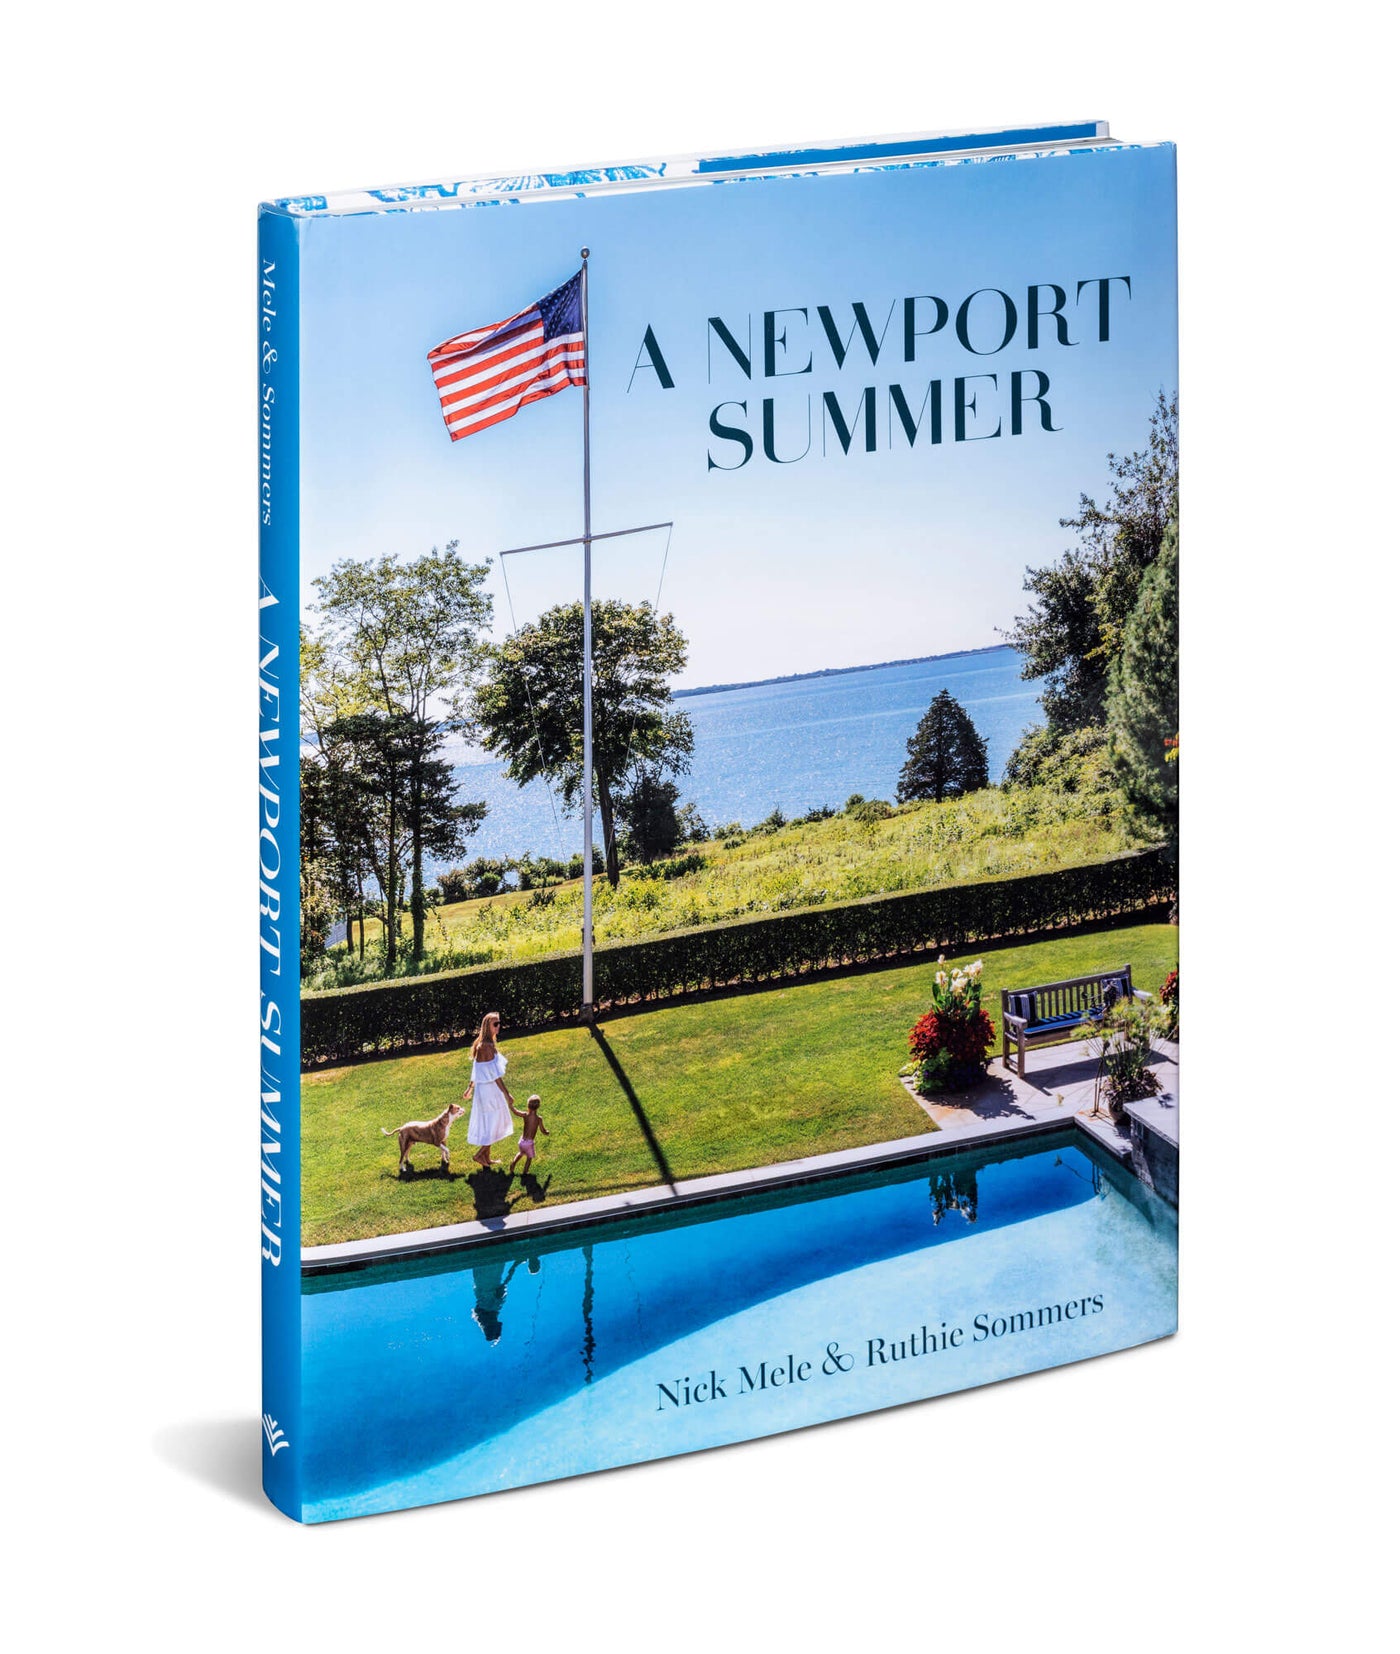 A Newport Summer by Nick Mele  & Ruthie Sommers